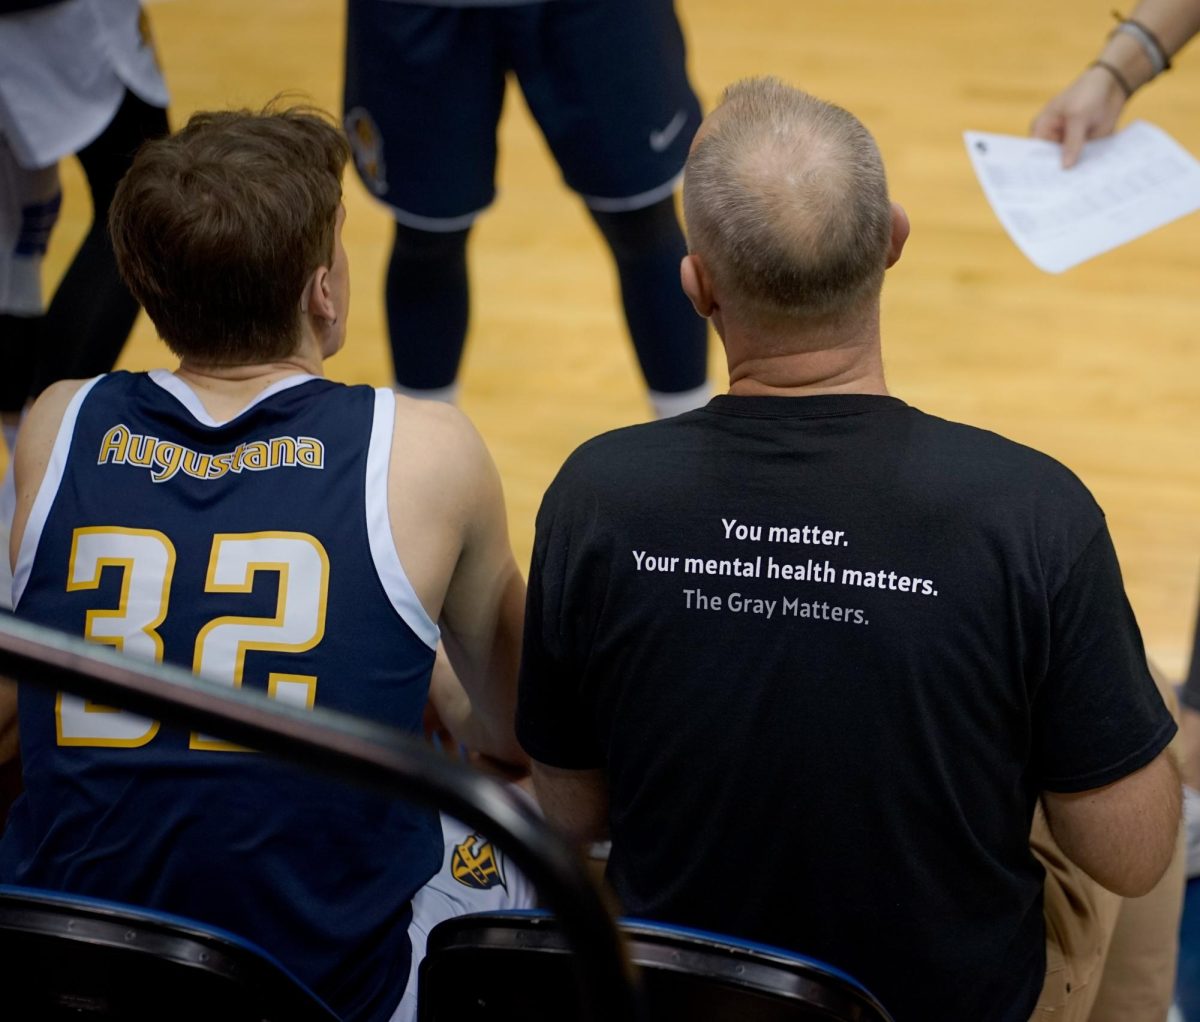 Augustana Men’s Volleyball Head Coach Mike Ducey wears The Grey Matters merch at the home game on Feb 17.